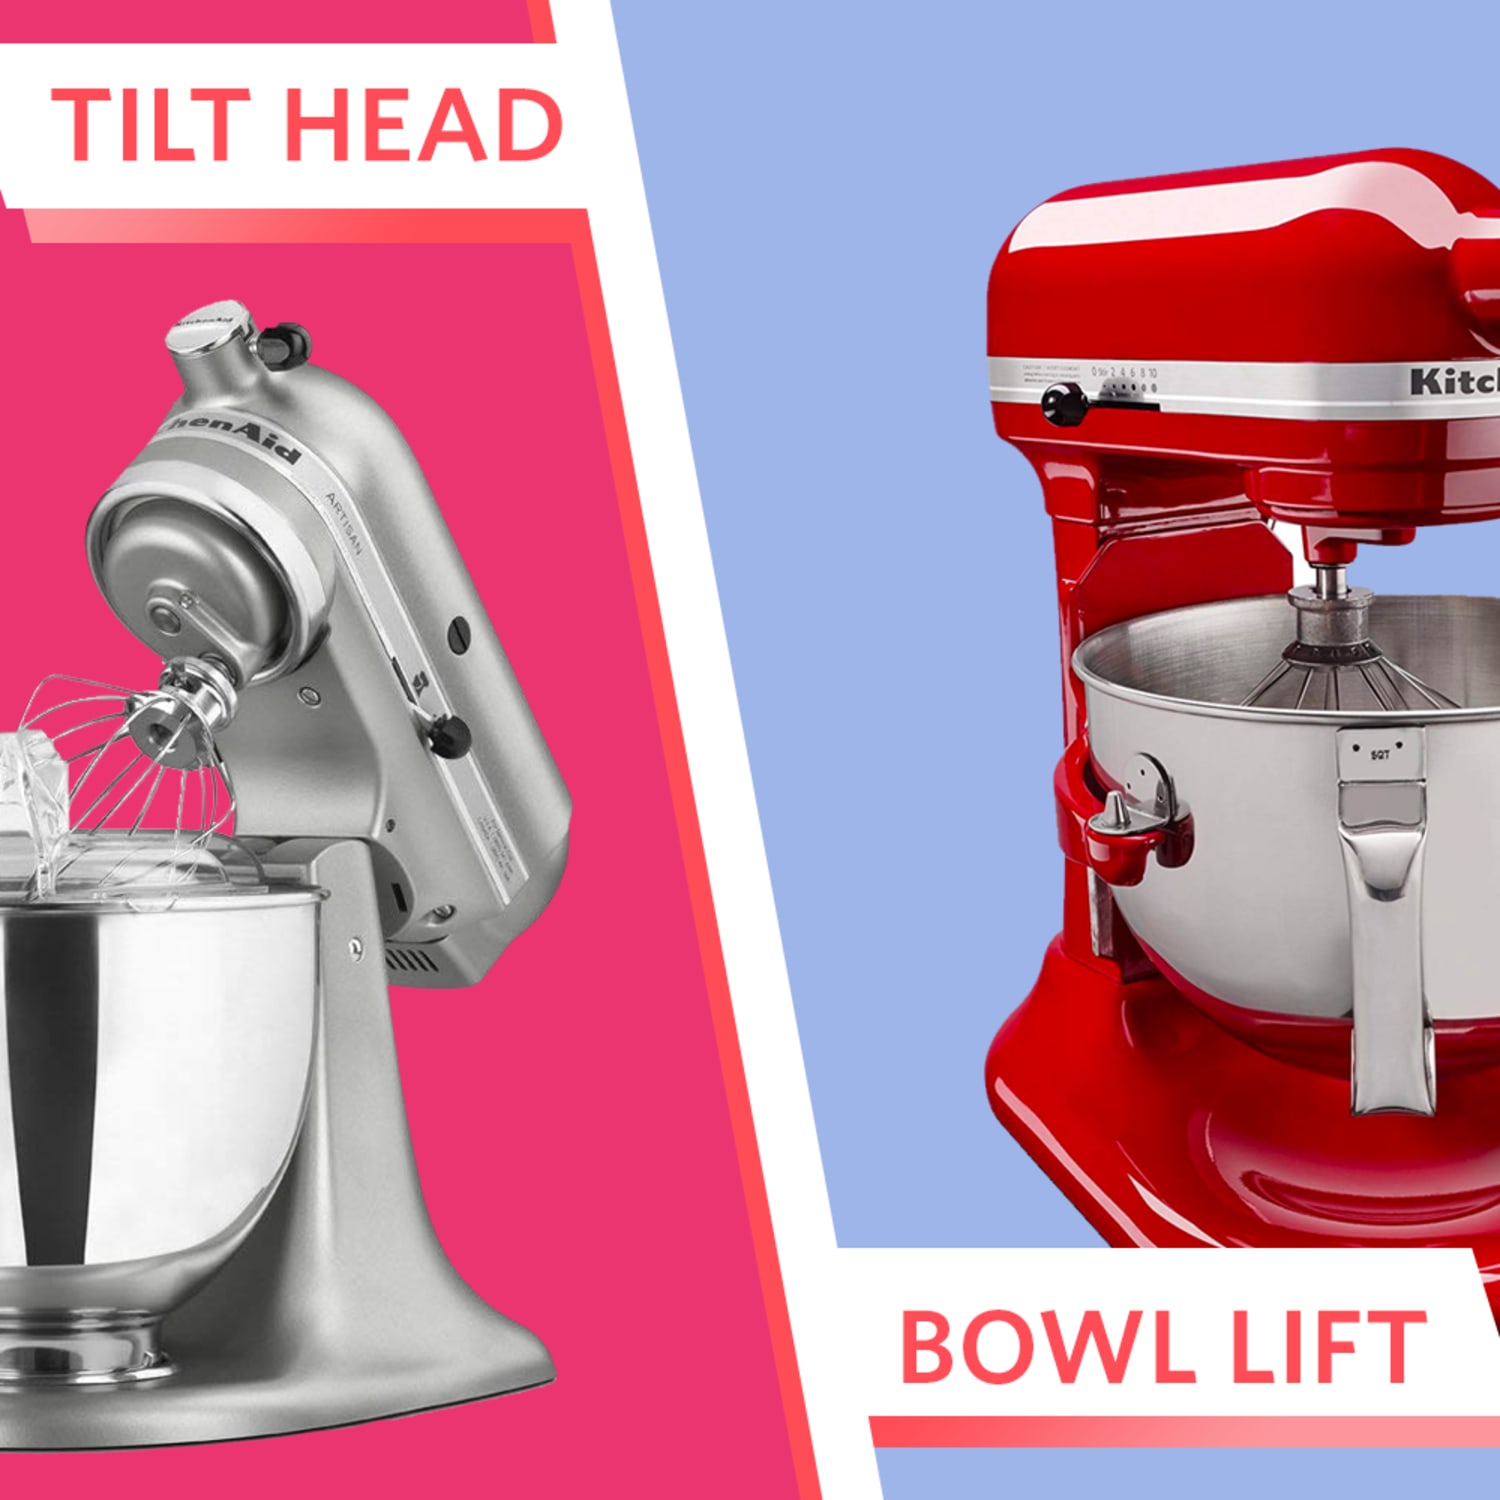 Bowl-Lift Vs. Tilt-Head Mixer: What's the Difference?